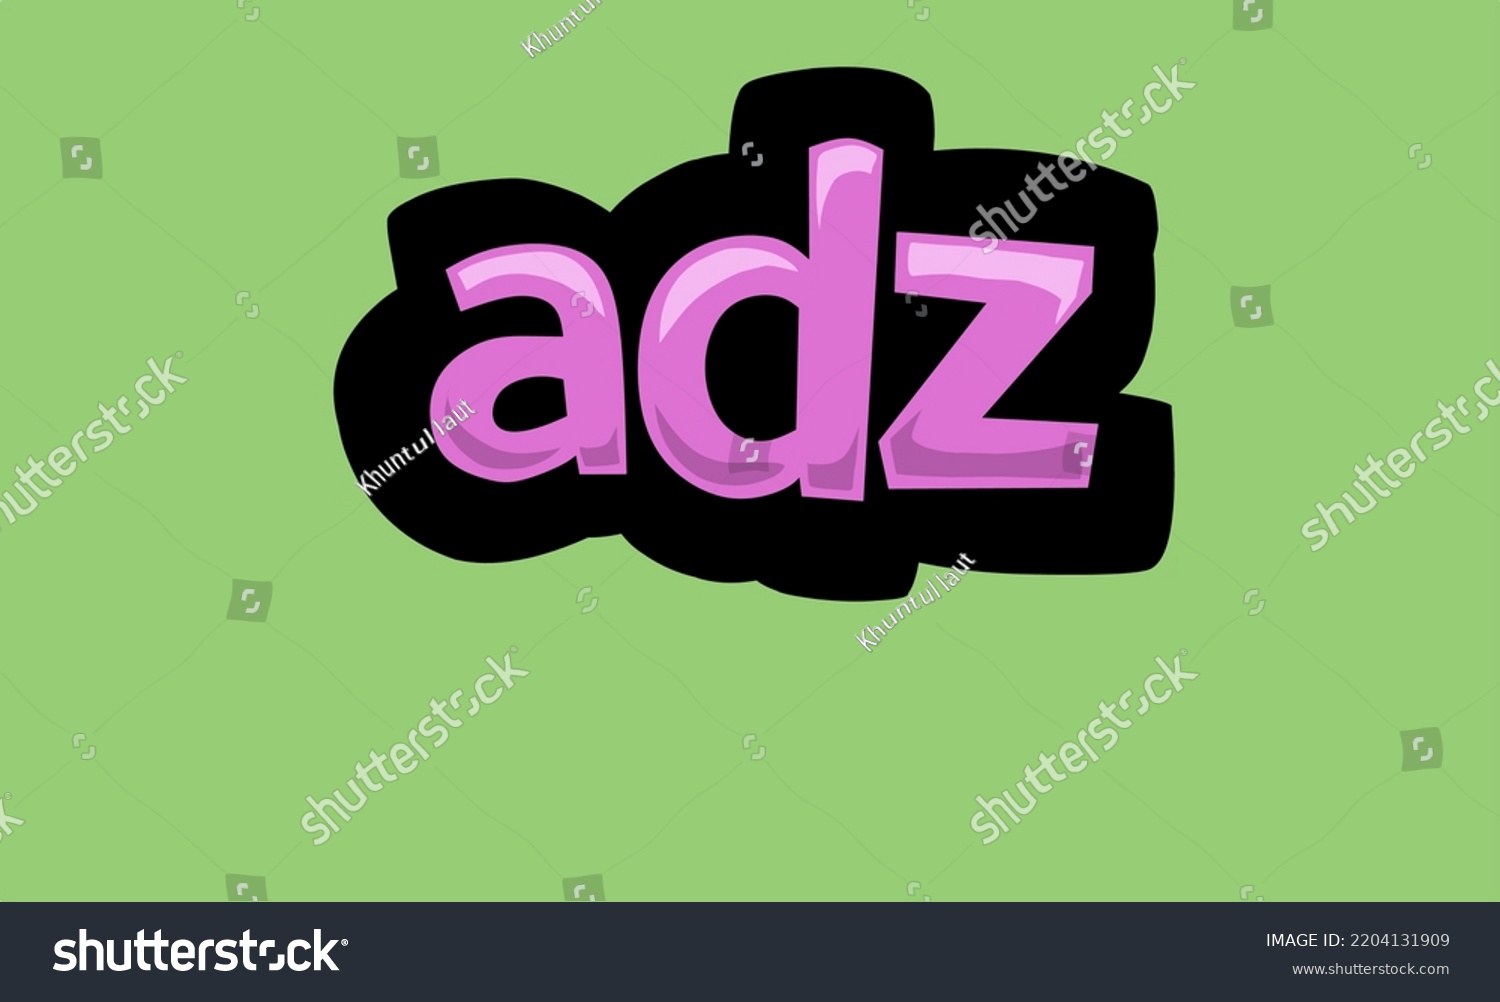 SVG of ADZ writing vector design on a green background very simple and very cool svg